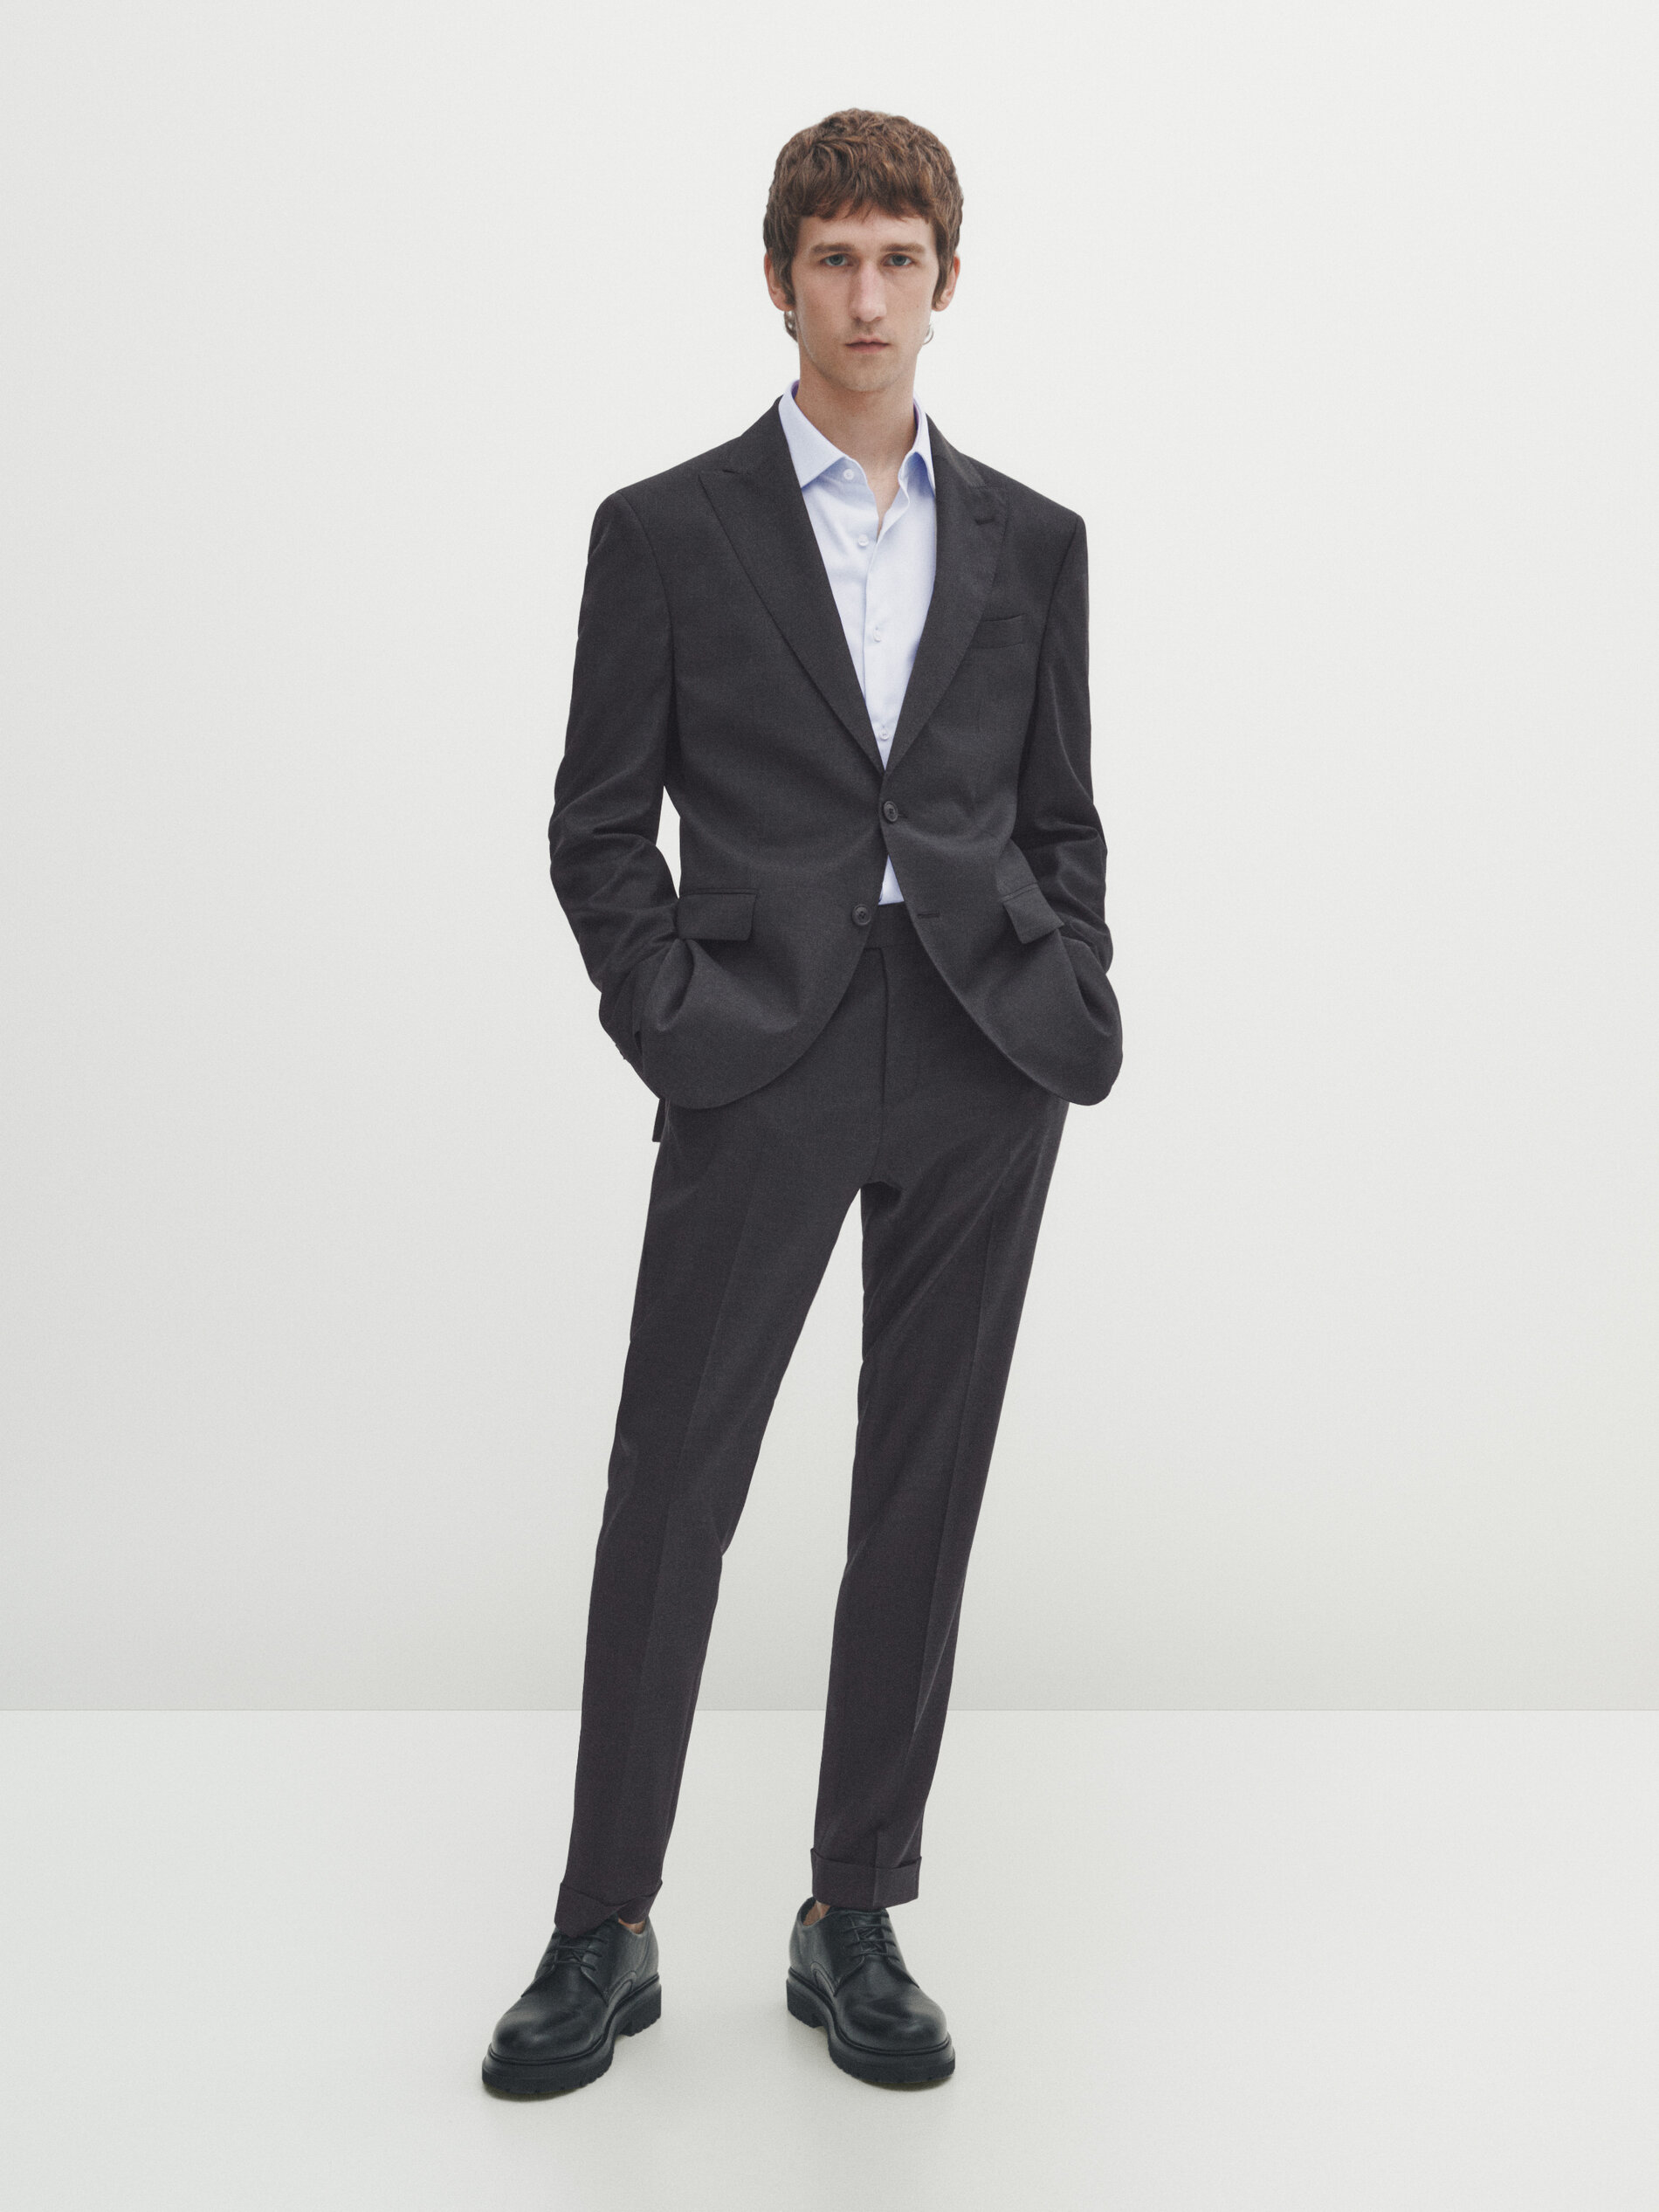 Grey Check Skinny Suit Trousers  New Look